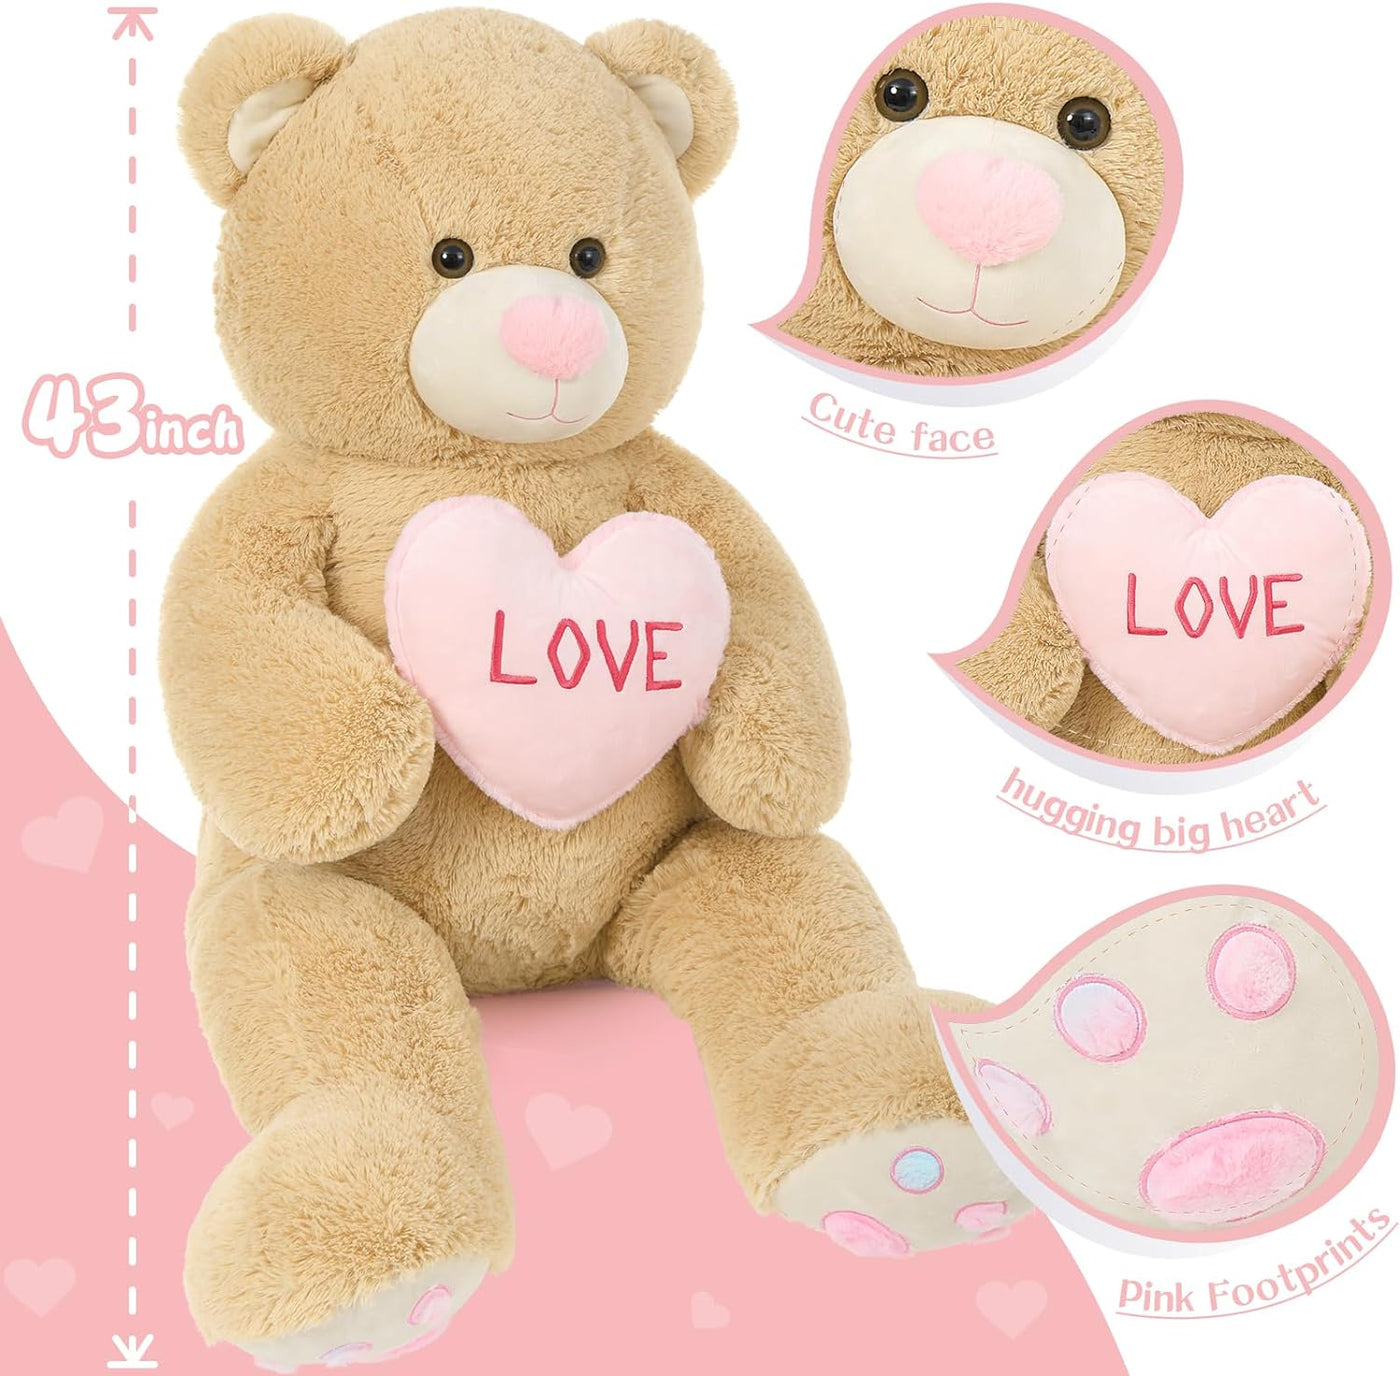 Valentine's Teddy Bear Plush Toy, Light Brown, 43 Inches